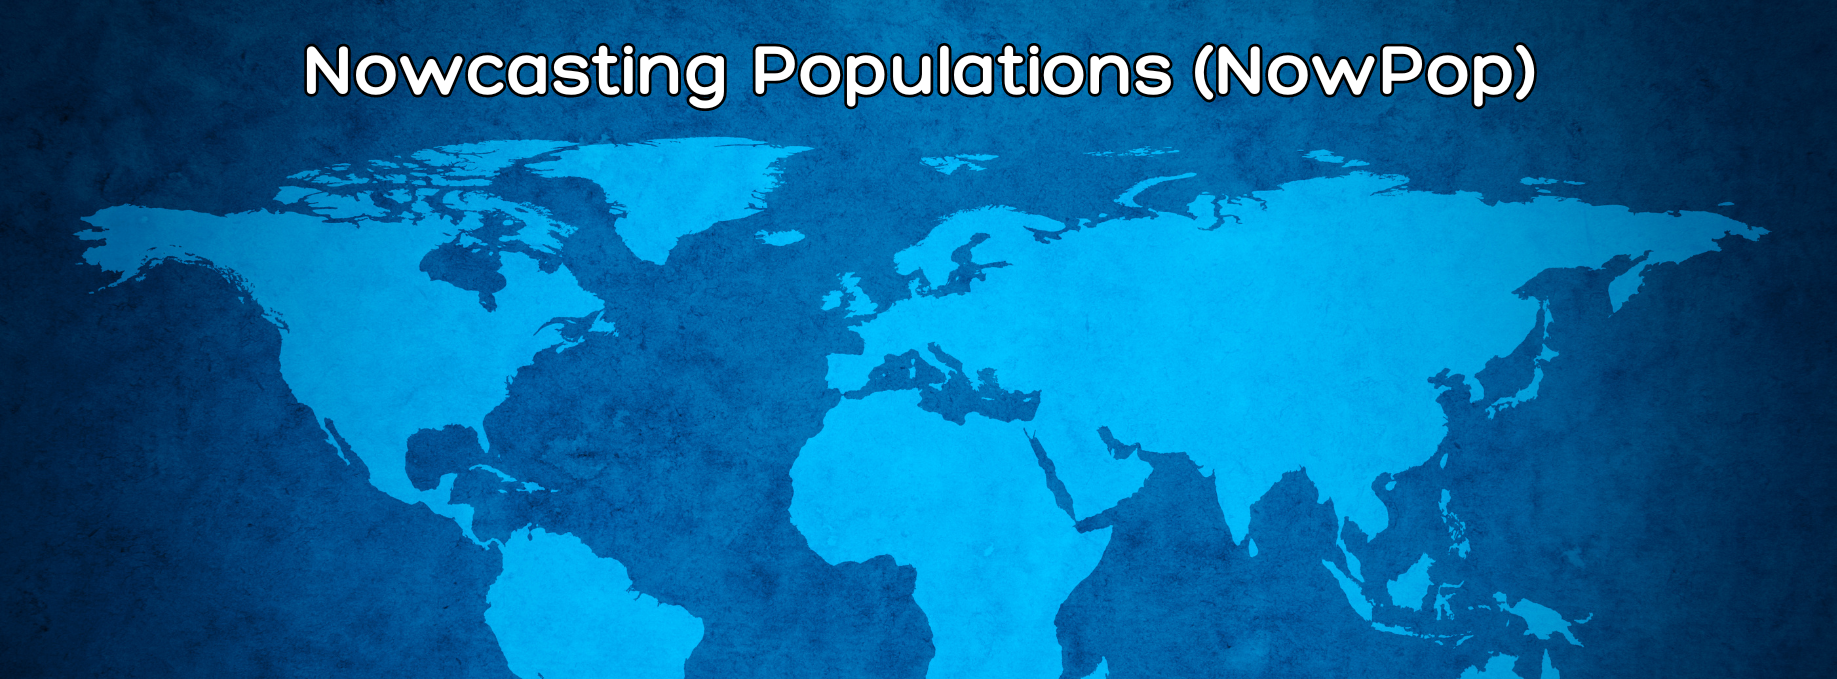 World map with overlay text: Nowcasting Populations (NowPop)